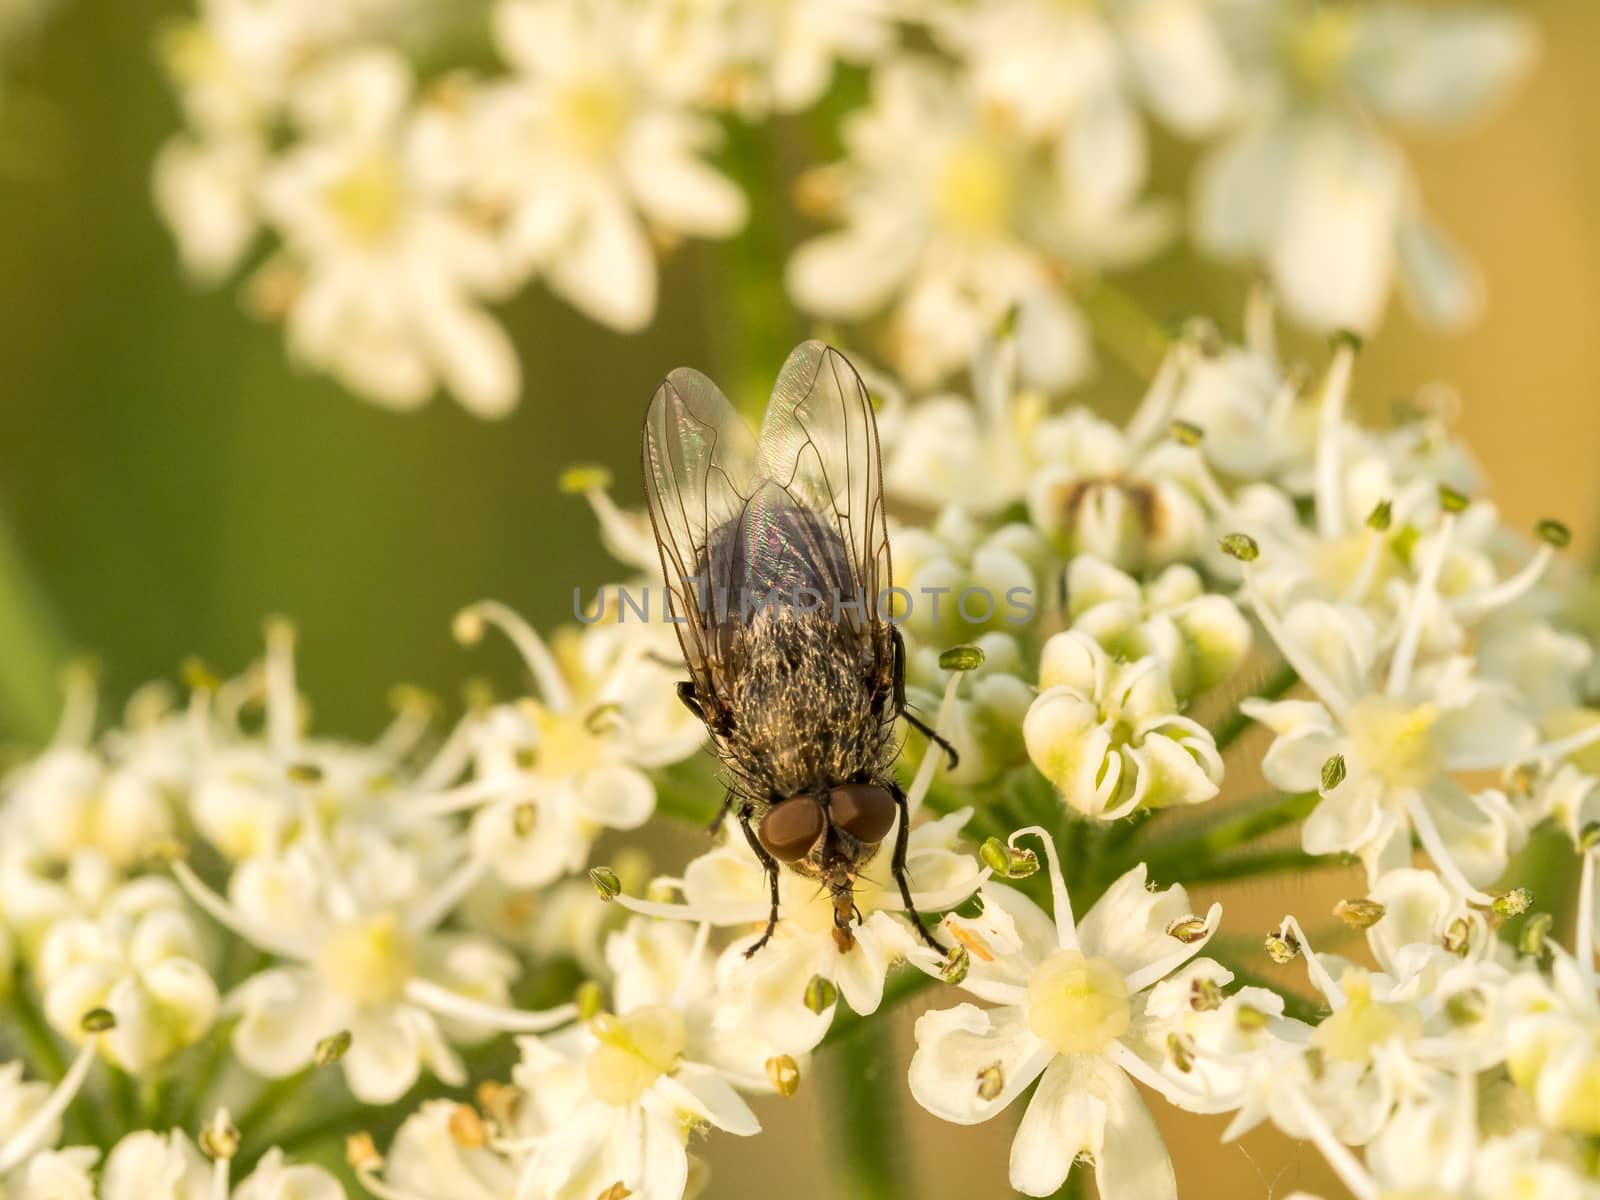 Very nice sharp shot of a typical fly sitting on top of wild white flowers. Beautiful conrast produced by the out of focus background and the subject is nice and sharp due to the straight on view